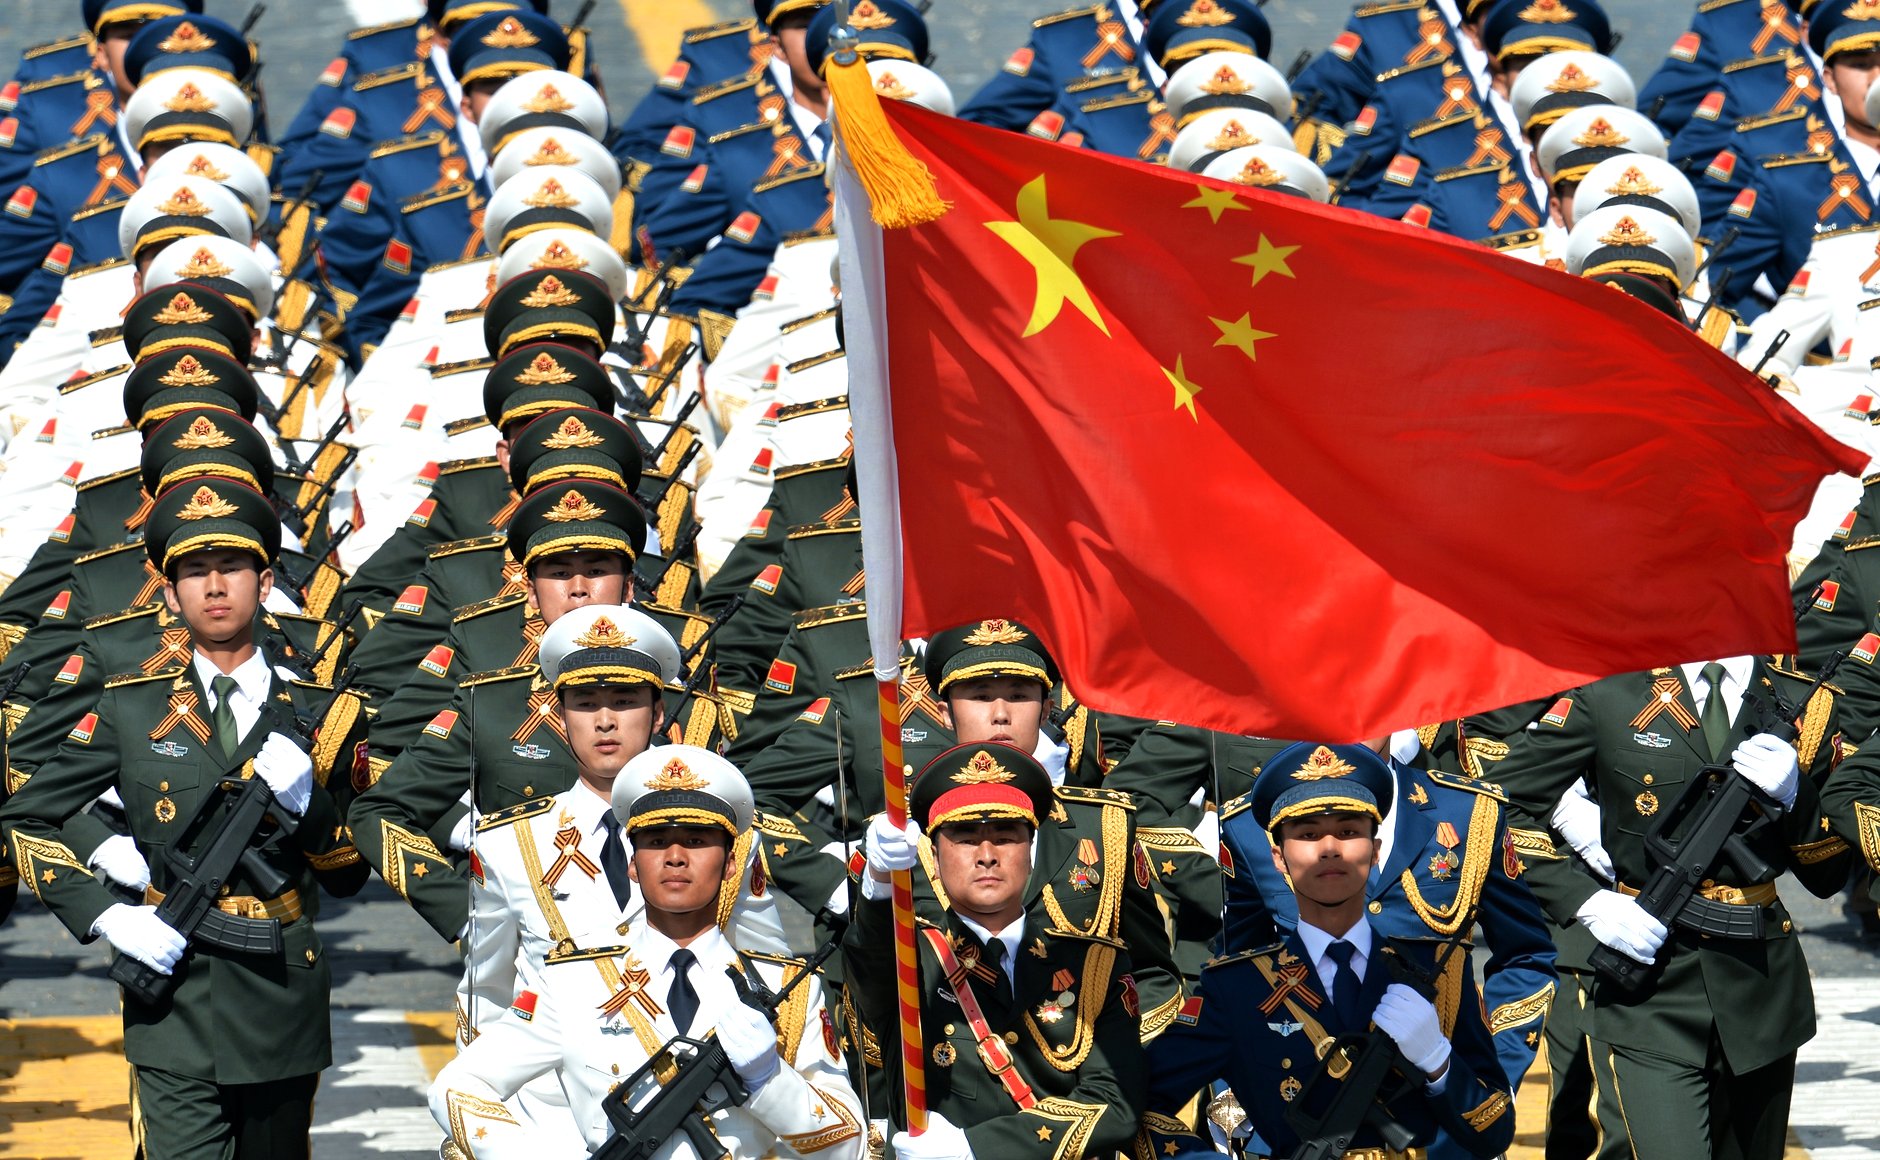 Image: China is successfully targeting US members of Congress with communist influence campaigns, warns DNI Ratcliffe